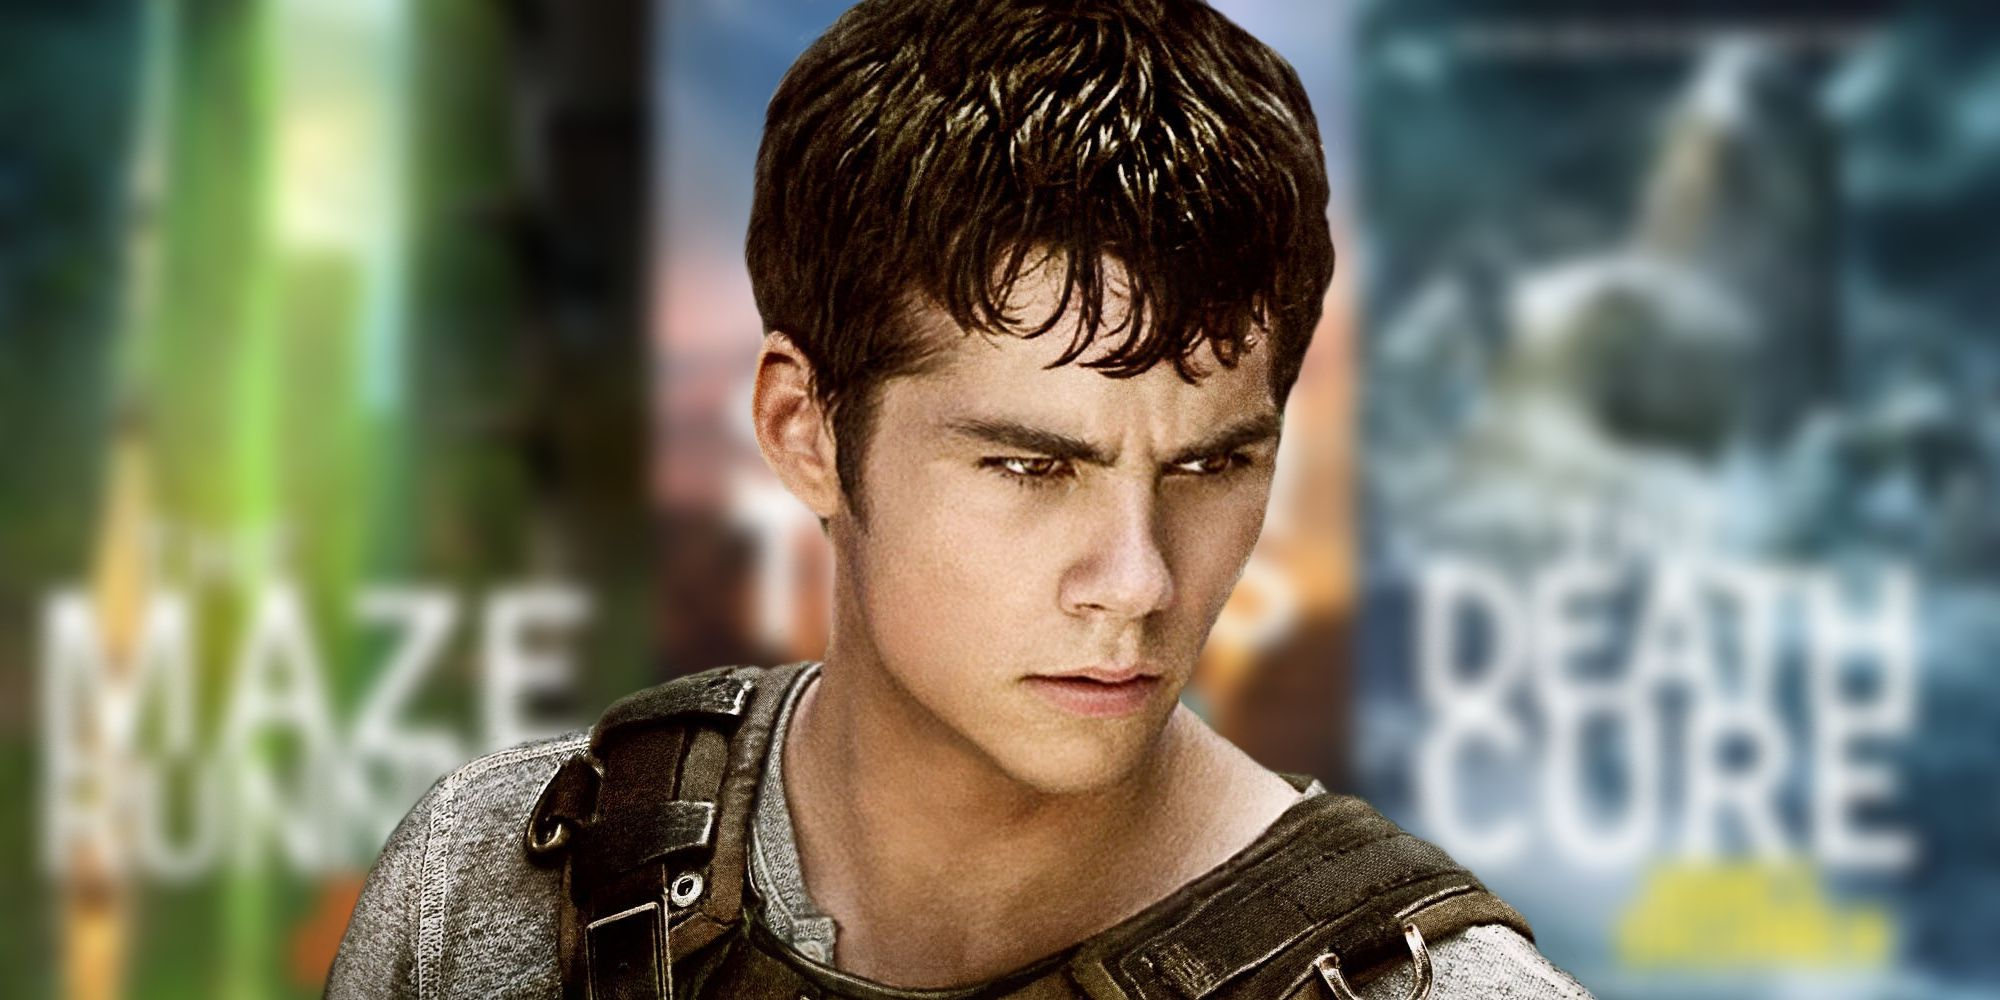 Thomas from The Maze Runner films overlayed on a blurred image of the book series